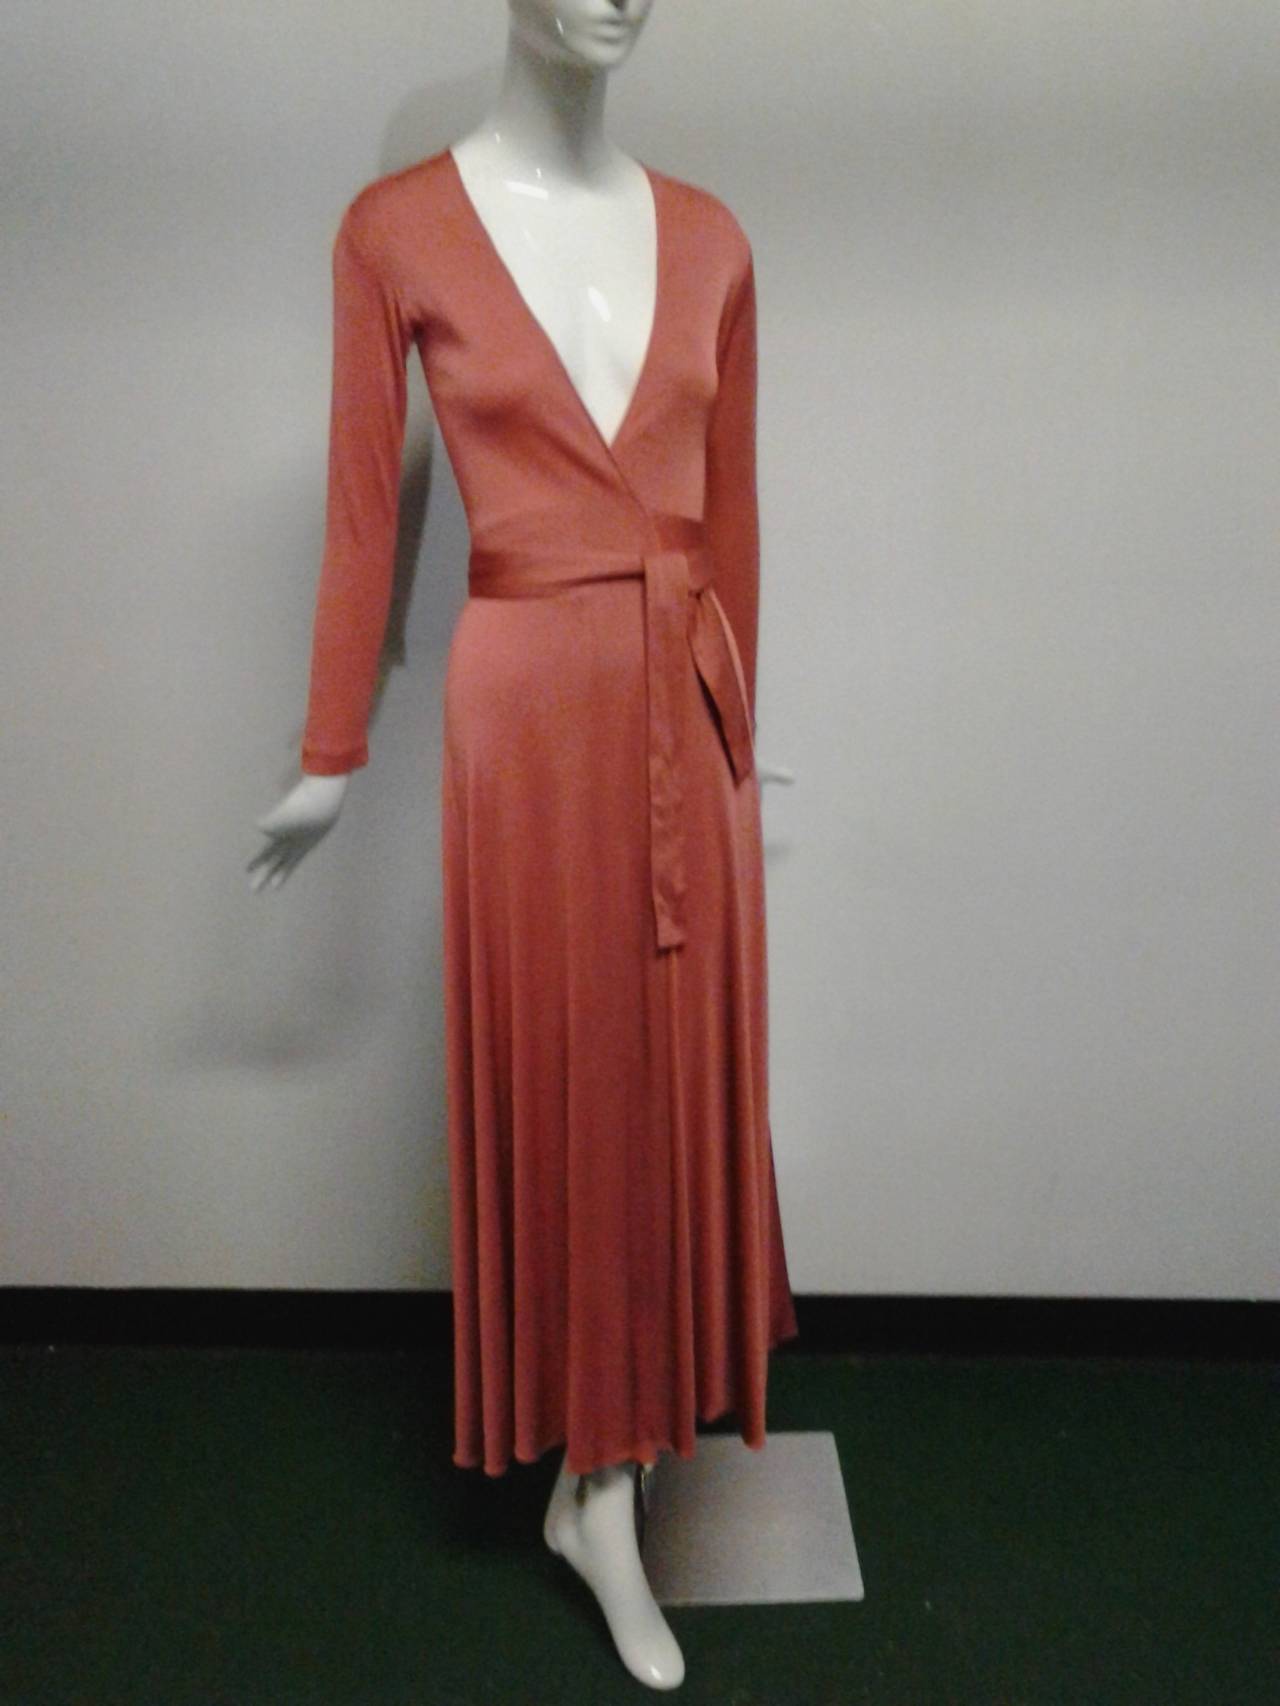 A sexy and slinky 1970s Scott Barrie persimmon color heavy weight rayon matte jersey disco wrap dress:  Plunging décolletage and belt tie.